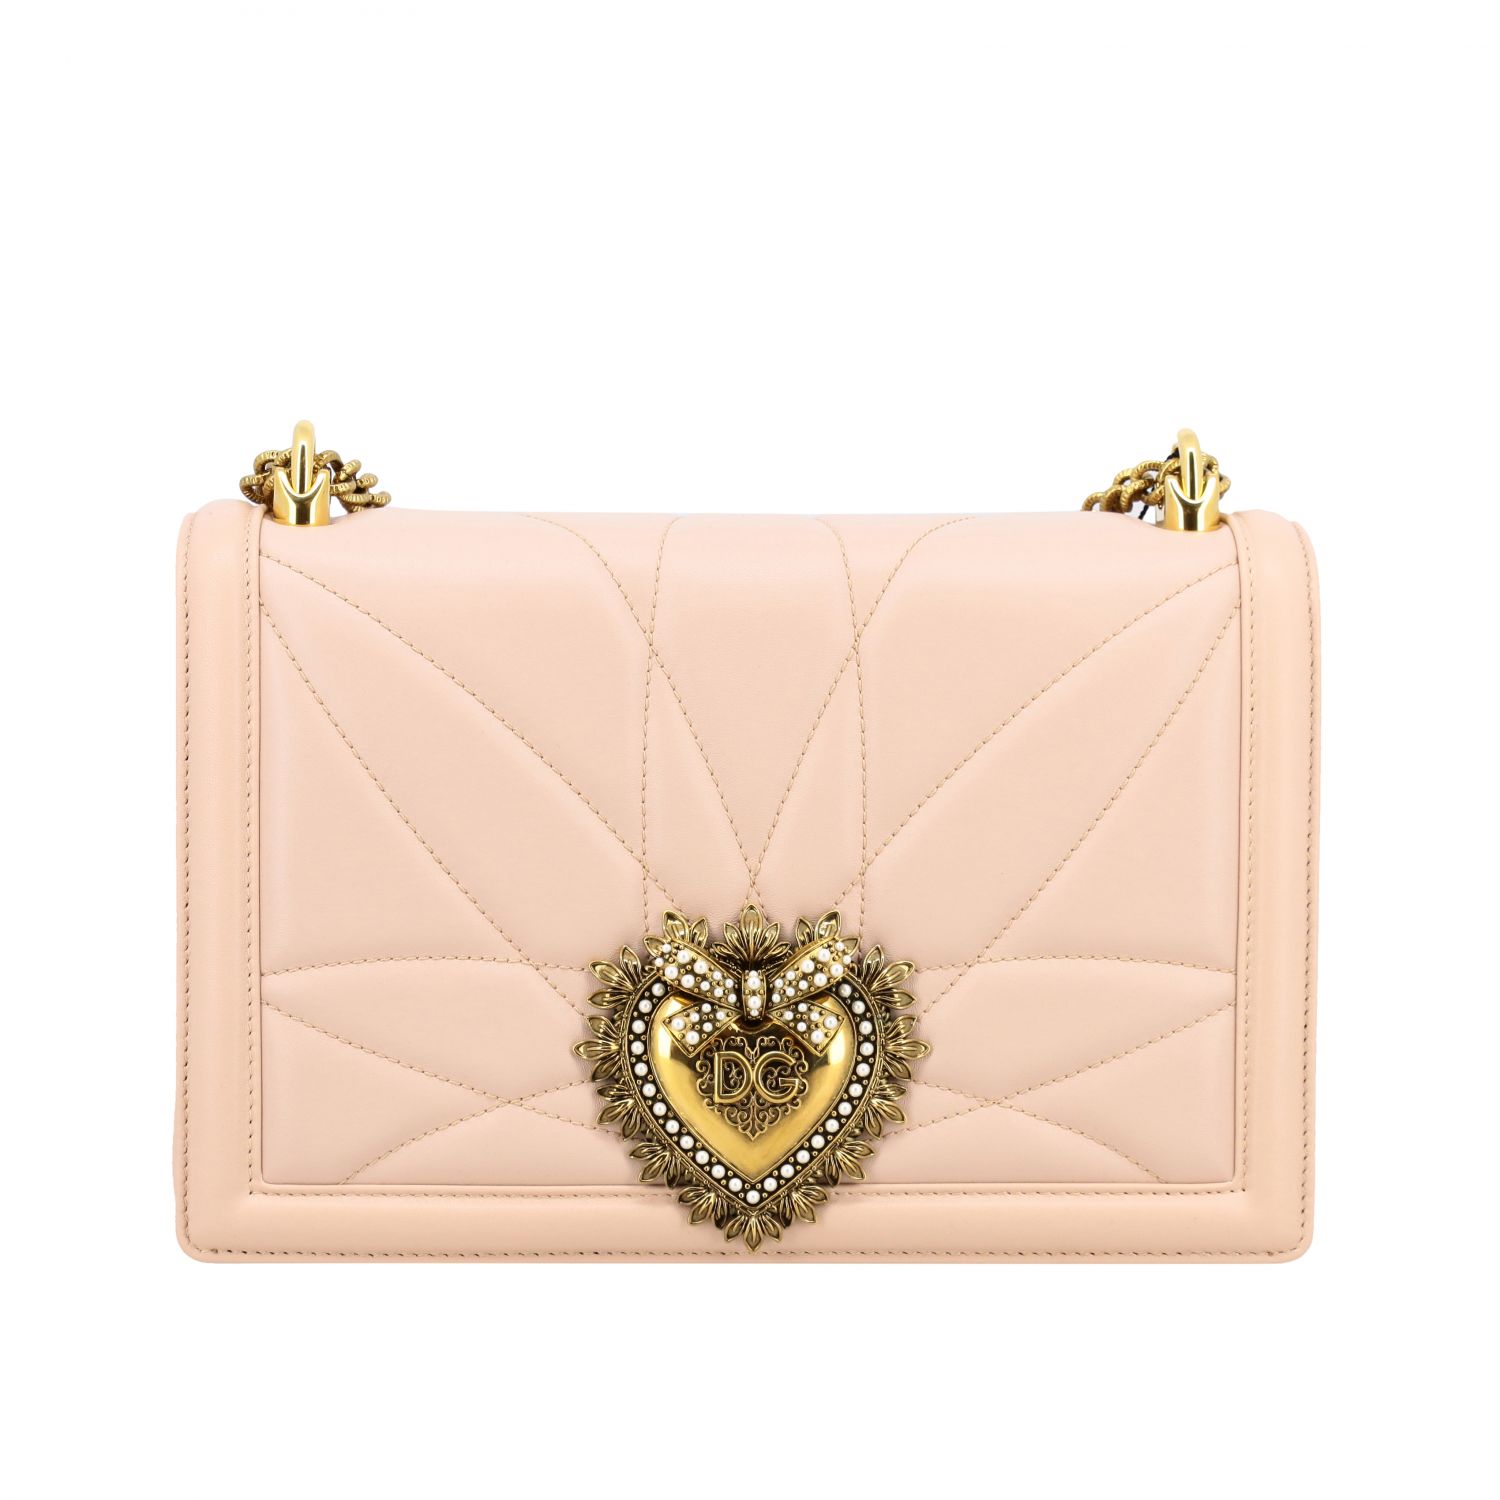 Dolce & Gabbana Outlet: Devotion leather bag with maxi heart - Blush ...